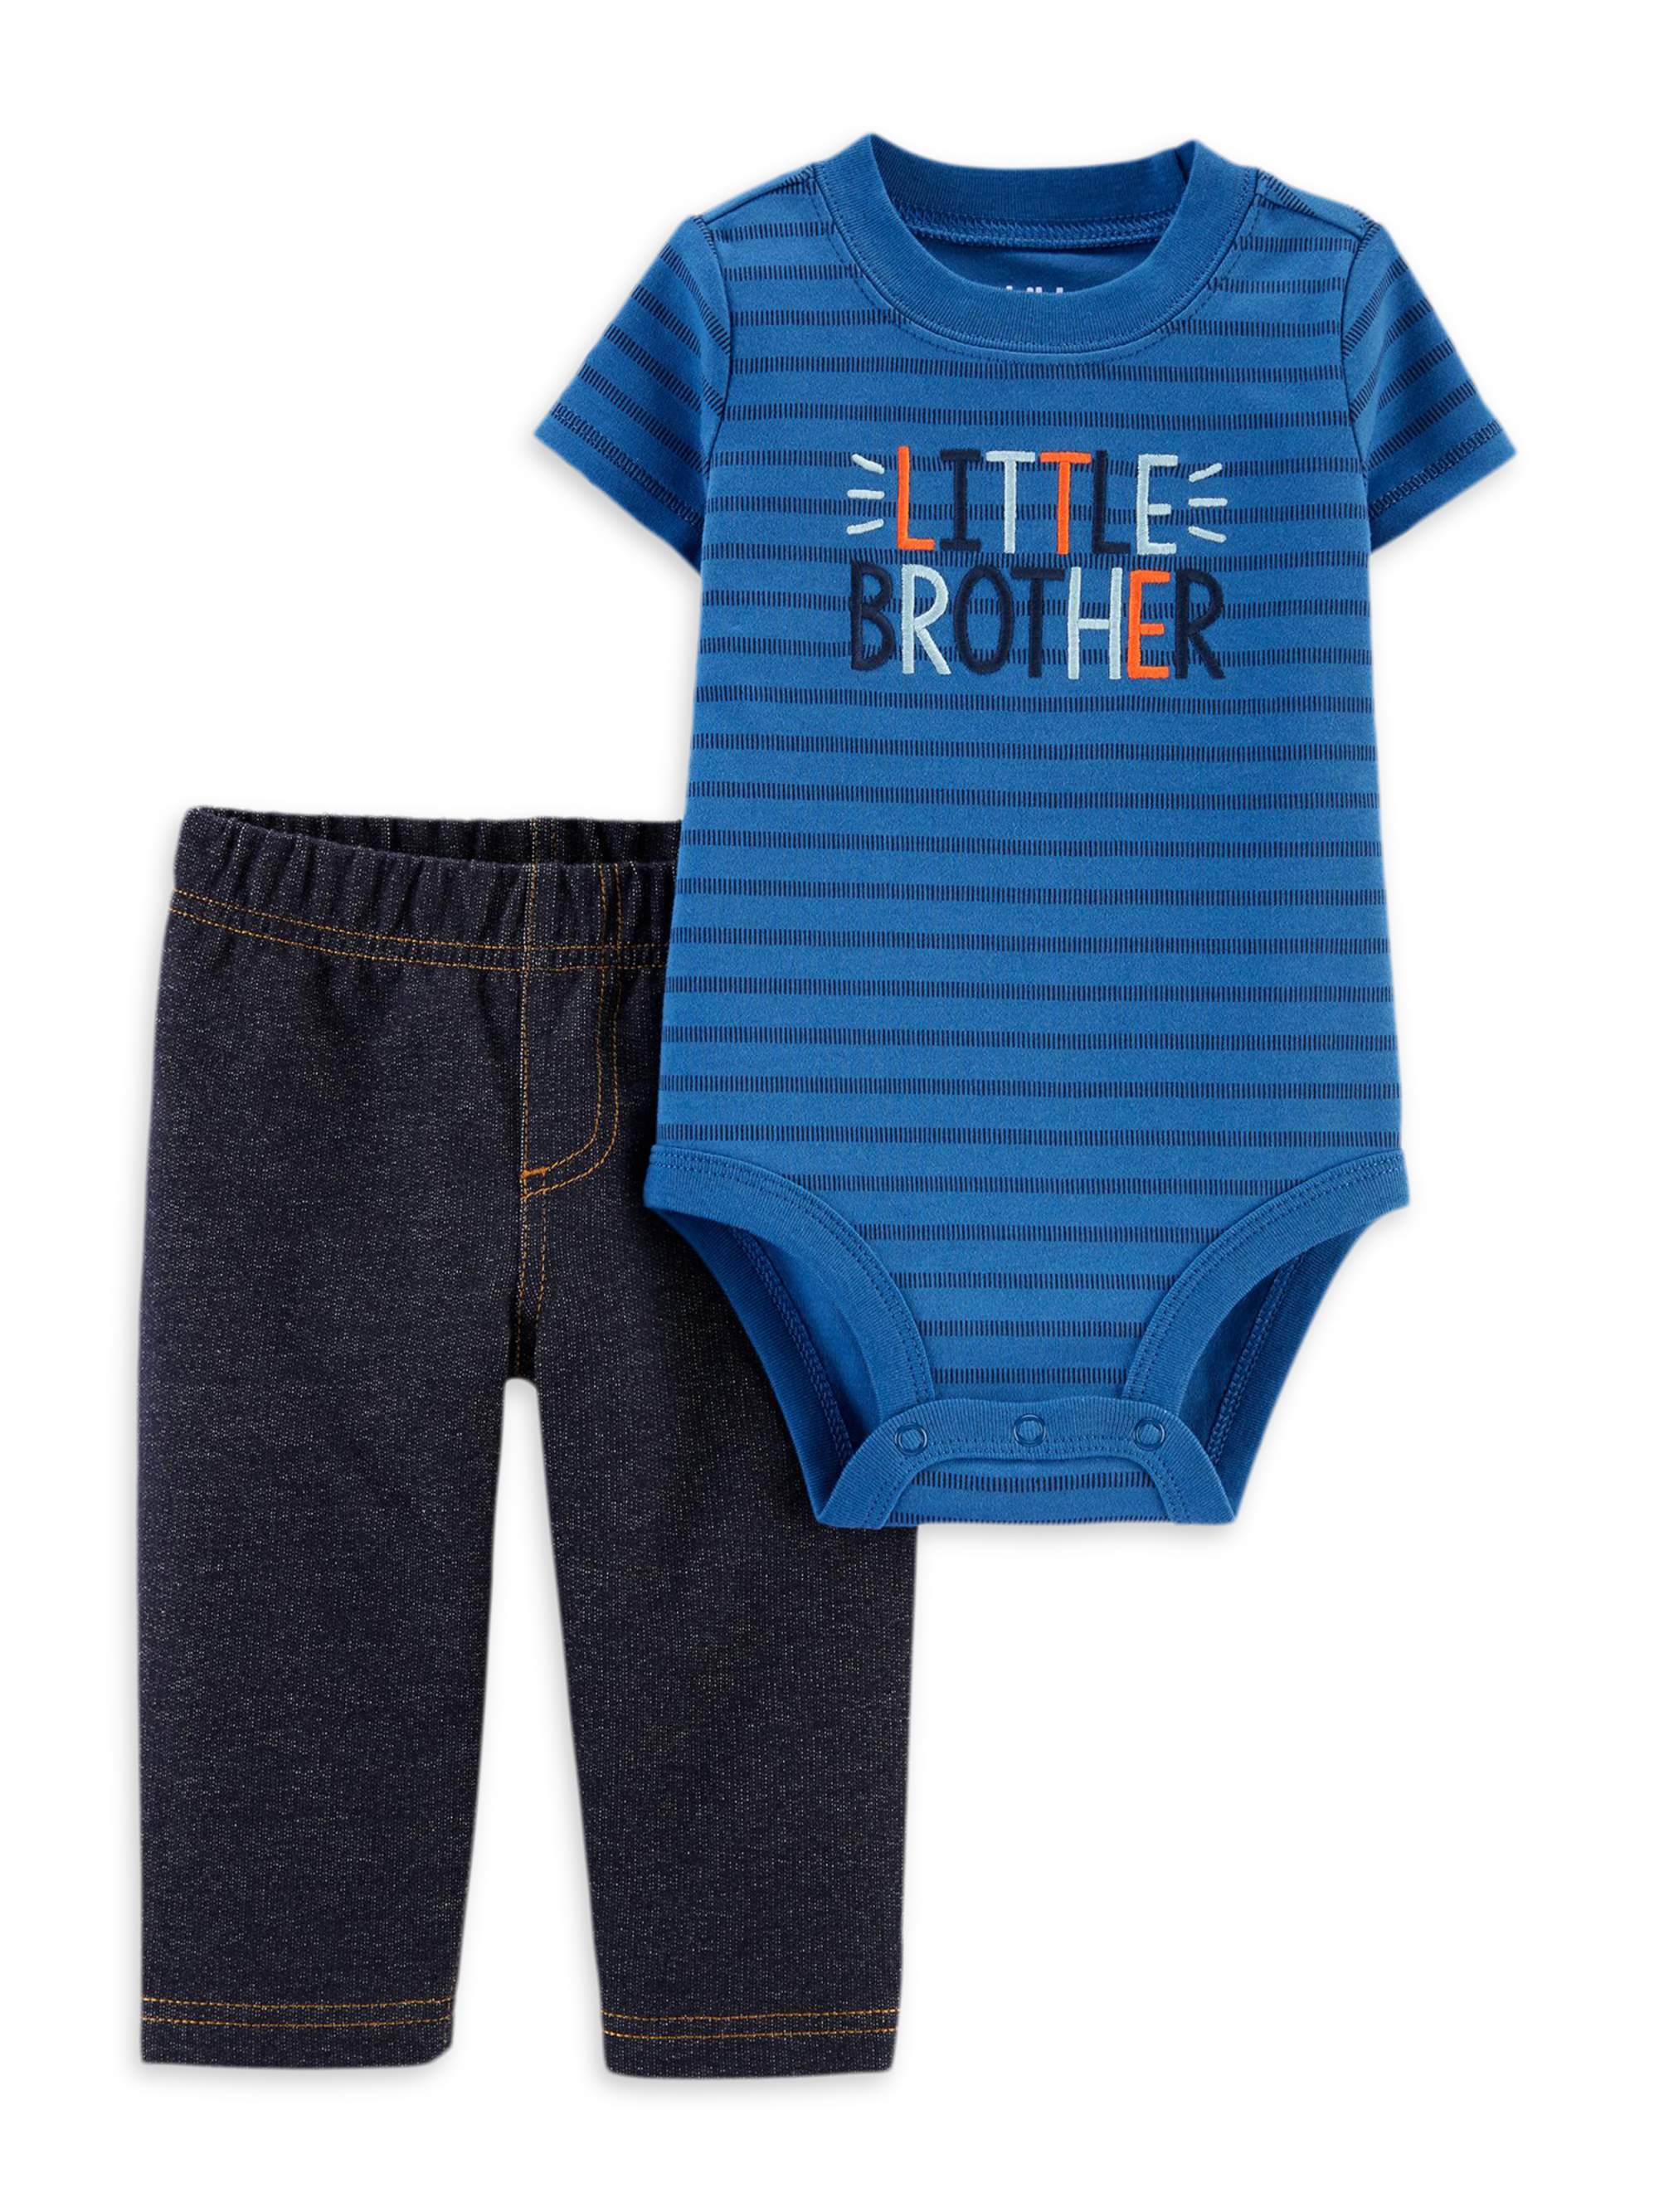 Carter's Child of Mine Baby Boy Brother Bodysuit and Pants - image 1 of 3